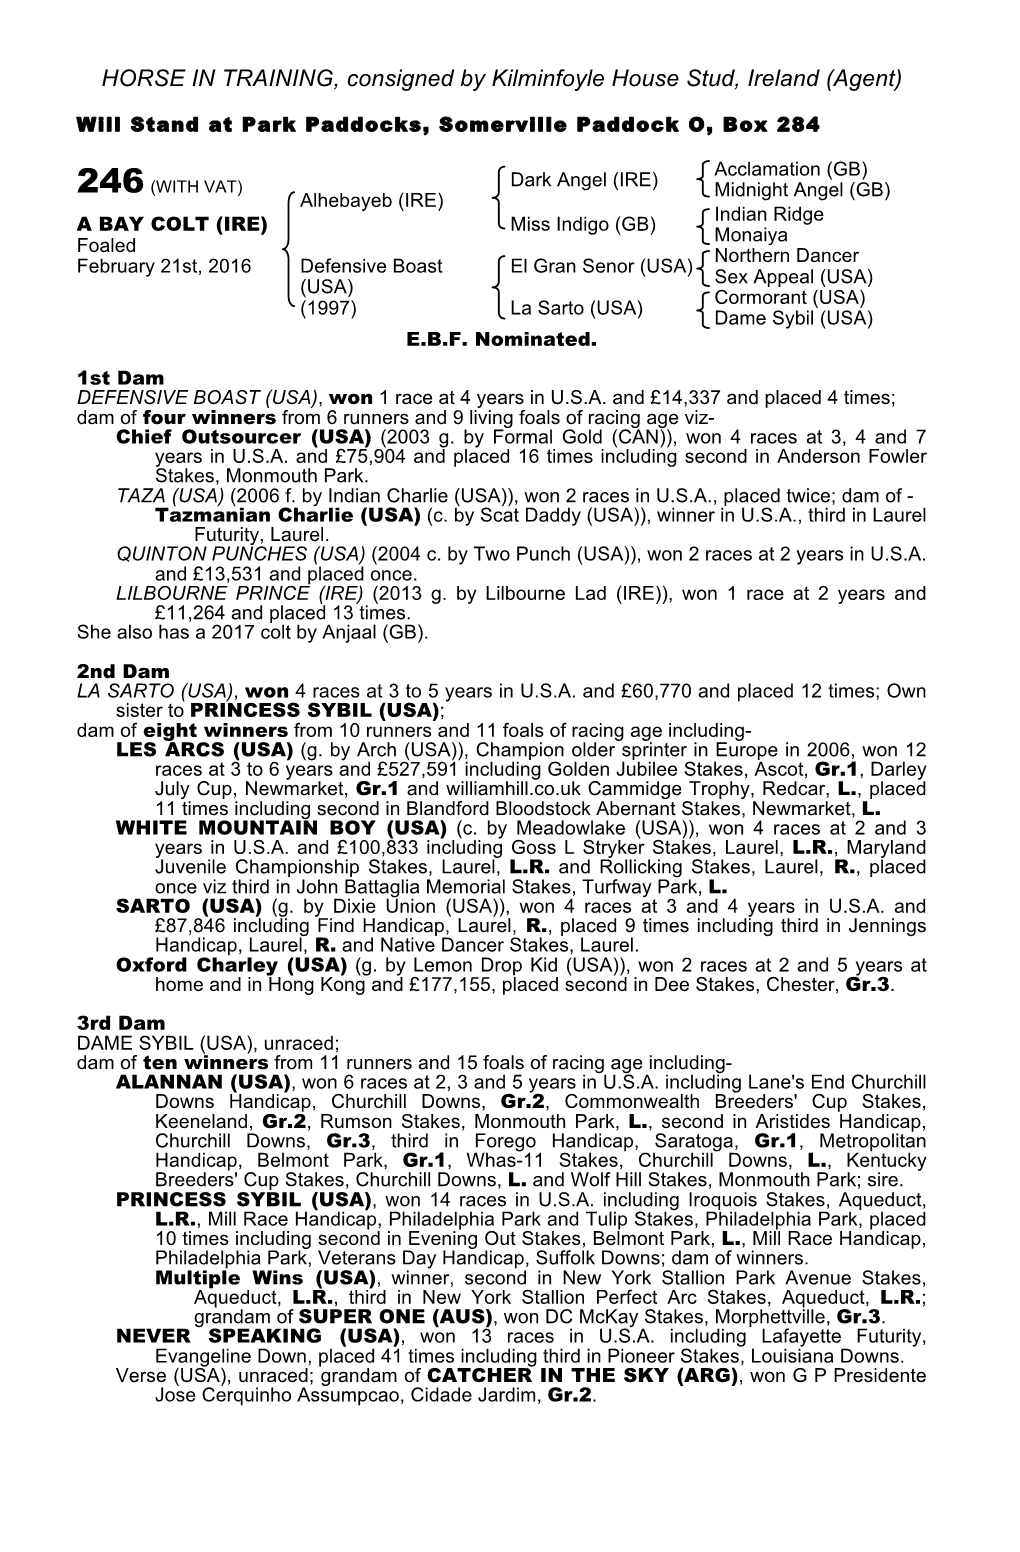 HORSE in TRAINING, Consigned by Kilminfoyle House Stud, Ireland (Agent)